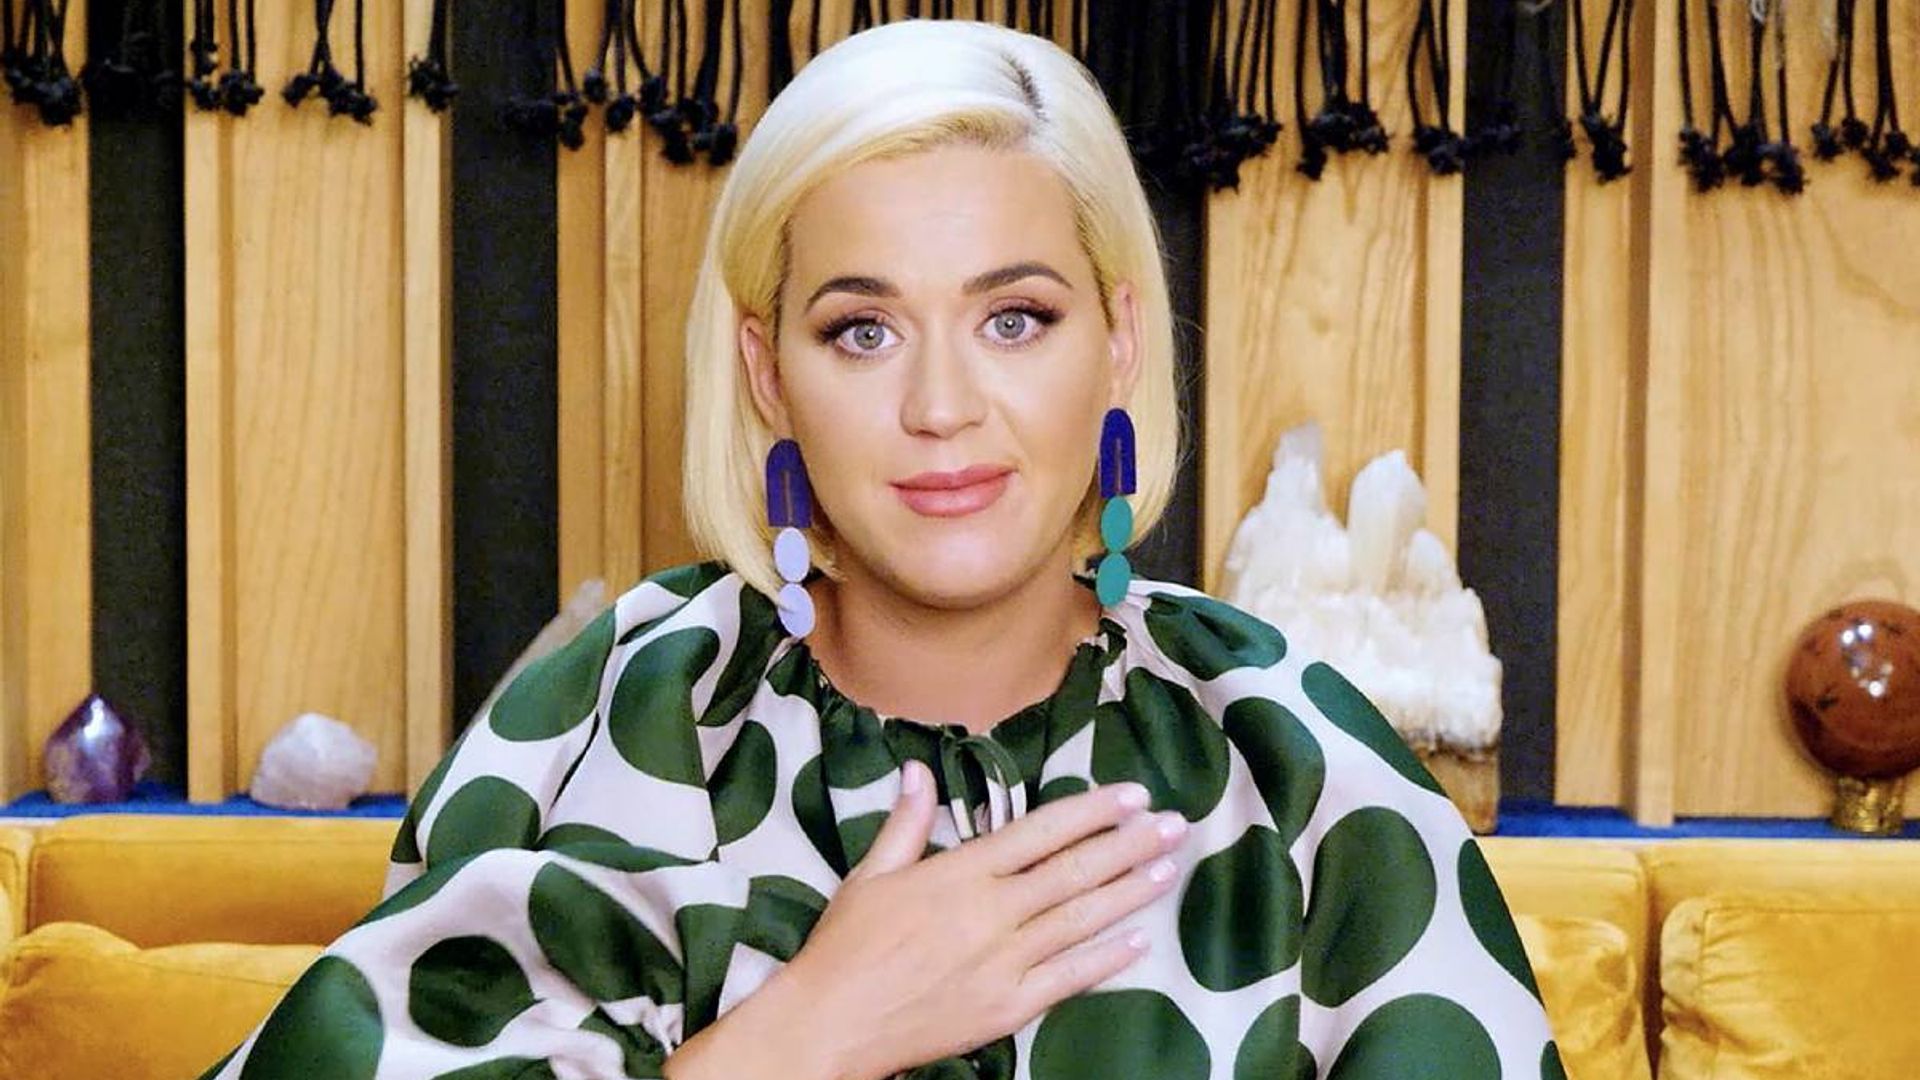 katy-perry-baby-daisy-first-photo-all-we-know